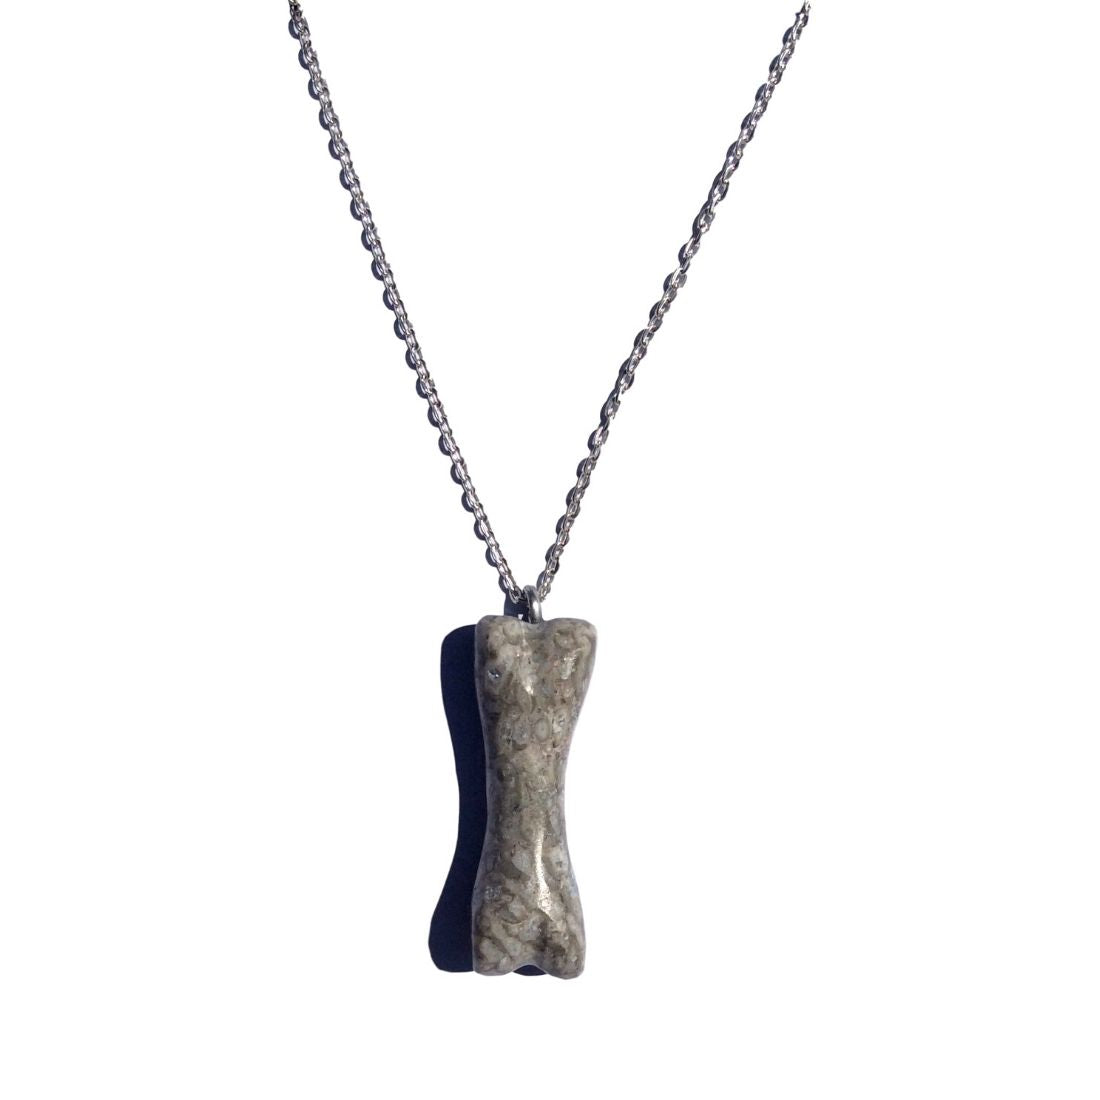 Gift for nature lover. Fossilized Tree Resin Gift